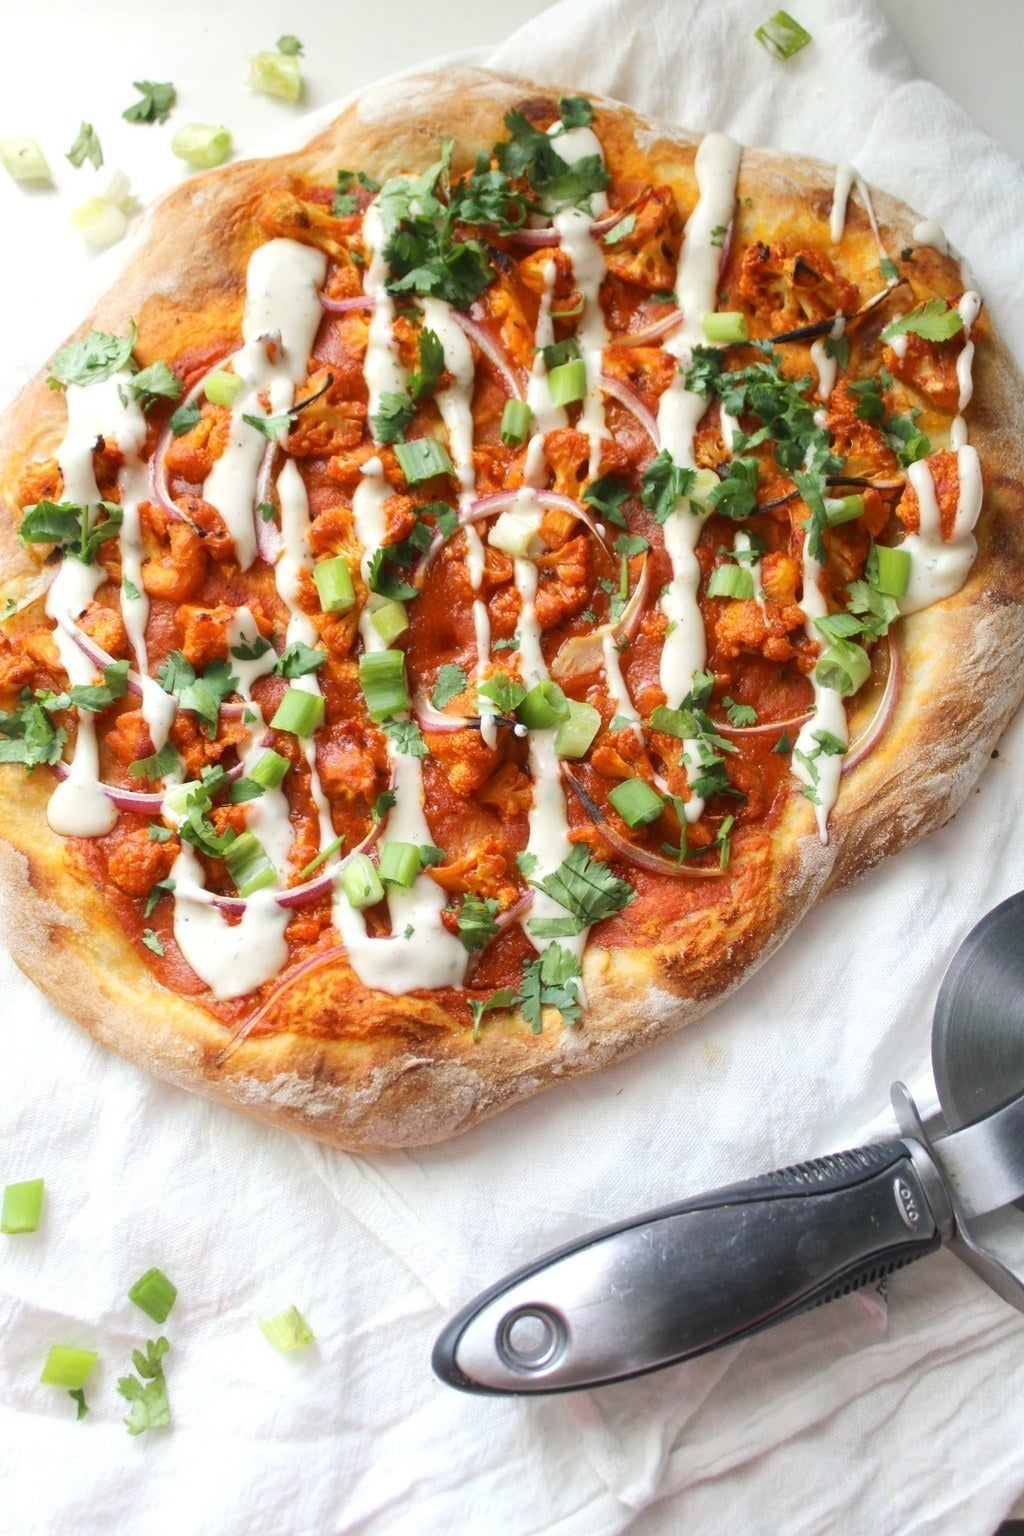 24 Meatless Monday Recipes With No Meat Or Dairy